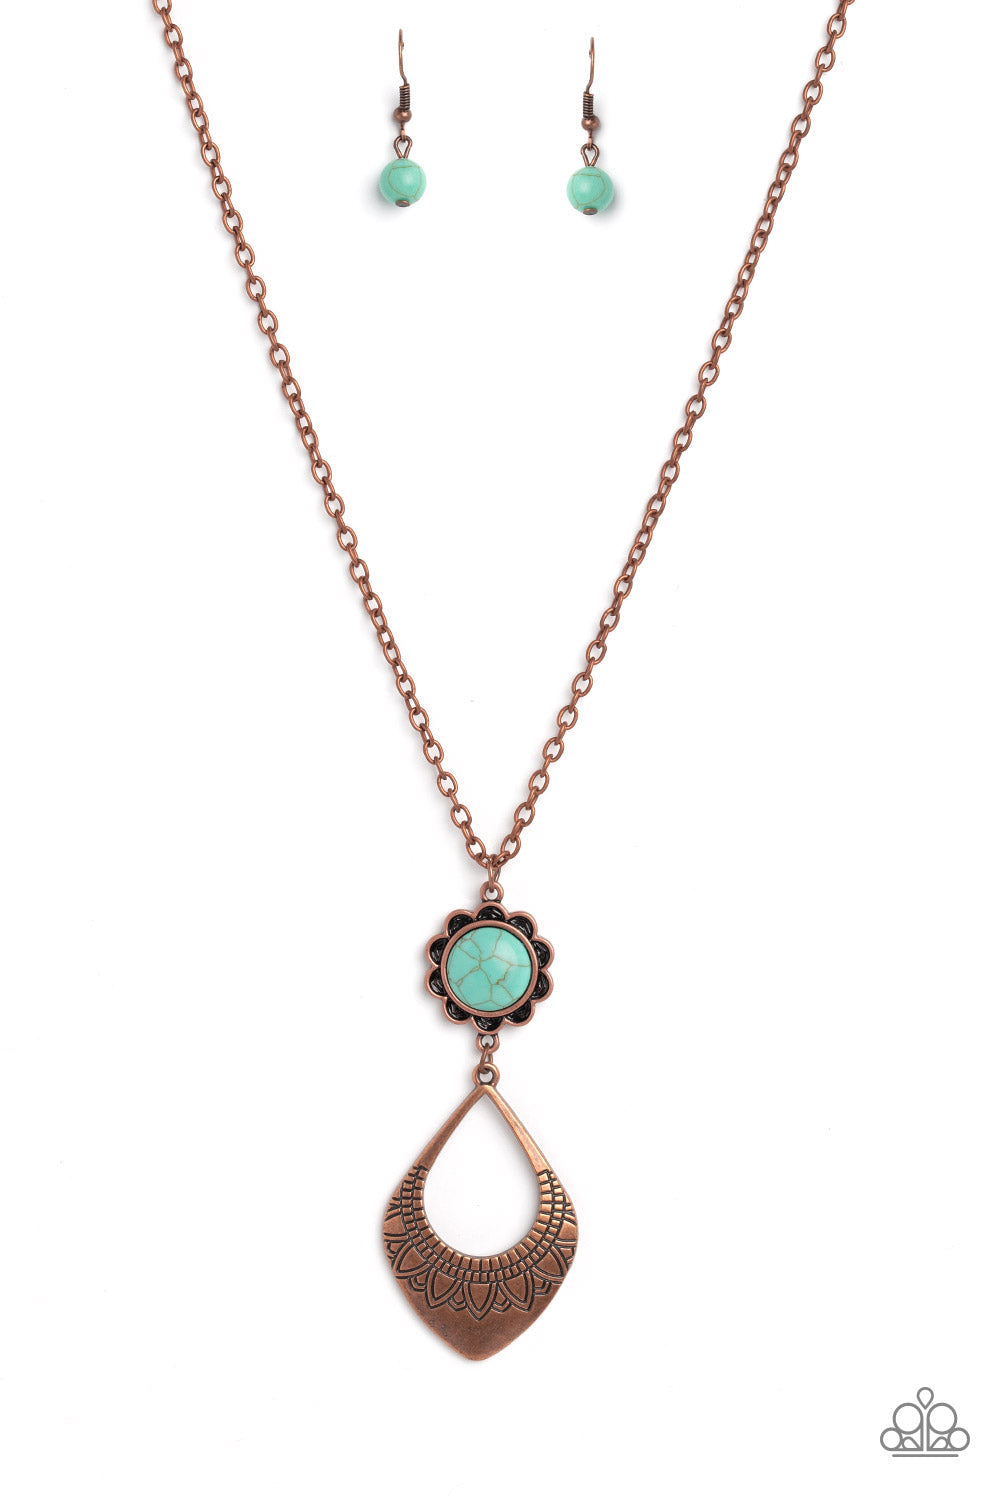 Stone TOLL - Copper and Turquoise Necklace - Paparazzi Accessories - An oversized turquoise stone, wrapped in a copper floral frame swings as the uppermost shape above an oversized, airy, copper spade-like frame creating a free-spirited finish. Stamped floral cutouts embellish along the lower curve of the teardrop-like frame for additional artisanal detail necklace.